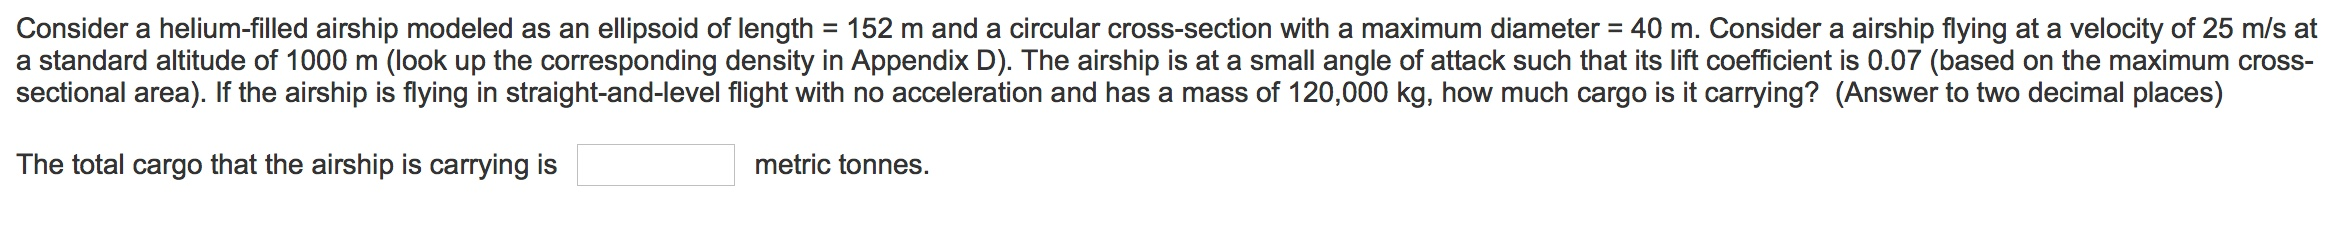 Consider a helium-filled airship modeled as an ellipsoid of length = 152 m and a circular cross-section with a maximum diameter = 40 m. Consider a airship flying at a velocity of 25 m/s at
a standard altitude of 1000 m (look up the corresponding density in Appendix D). The airship is at a small angle of attack such that its lift coefficient is 0.07 (based on the maximum cross-
sectional area). If the airship is flying in straight-and-level flight with no acceleration and has a mass of 120,000 kg, how much cargo is it carrying? (Answer to two decimal places)
The total cargo that the airship is carrying is
metric tonnes.
